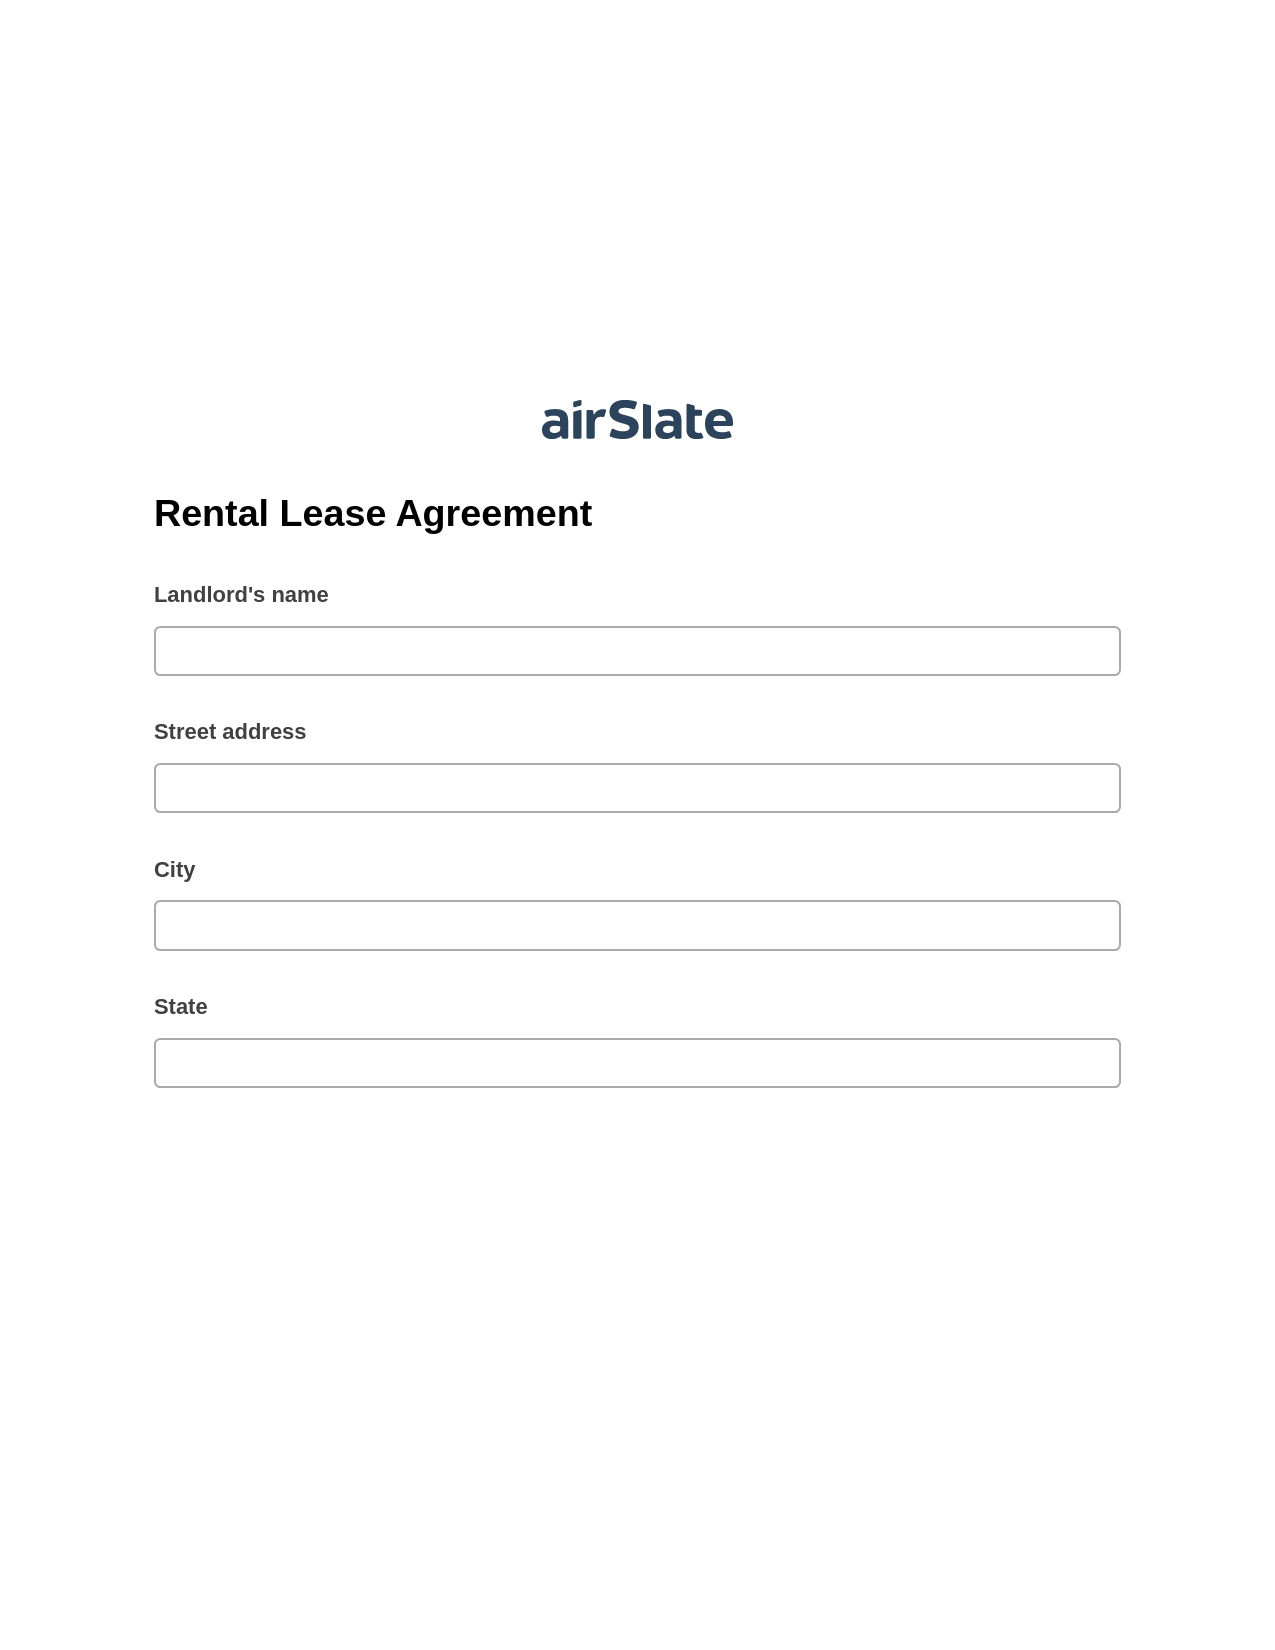 Rental Lease Agreement Pre-fill from CSV File Bot, Update NetSuite Records Bot, Post-finish Document Bot